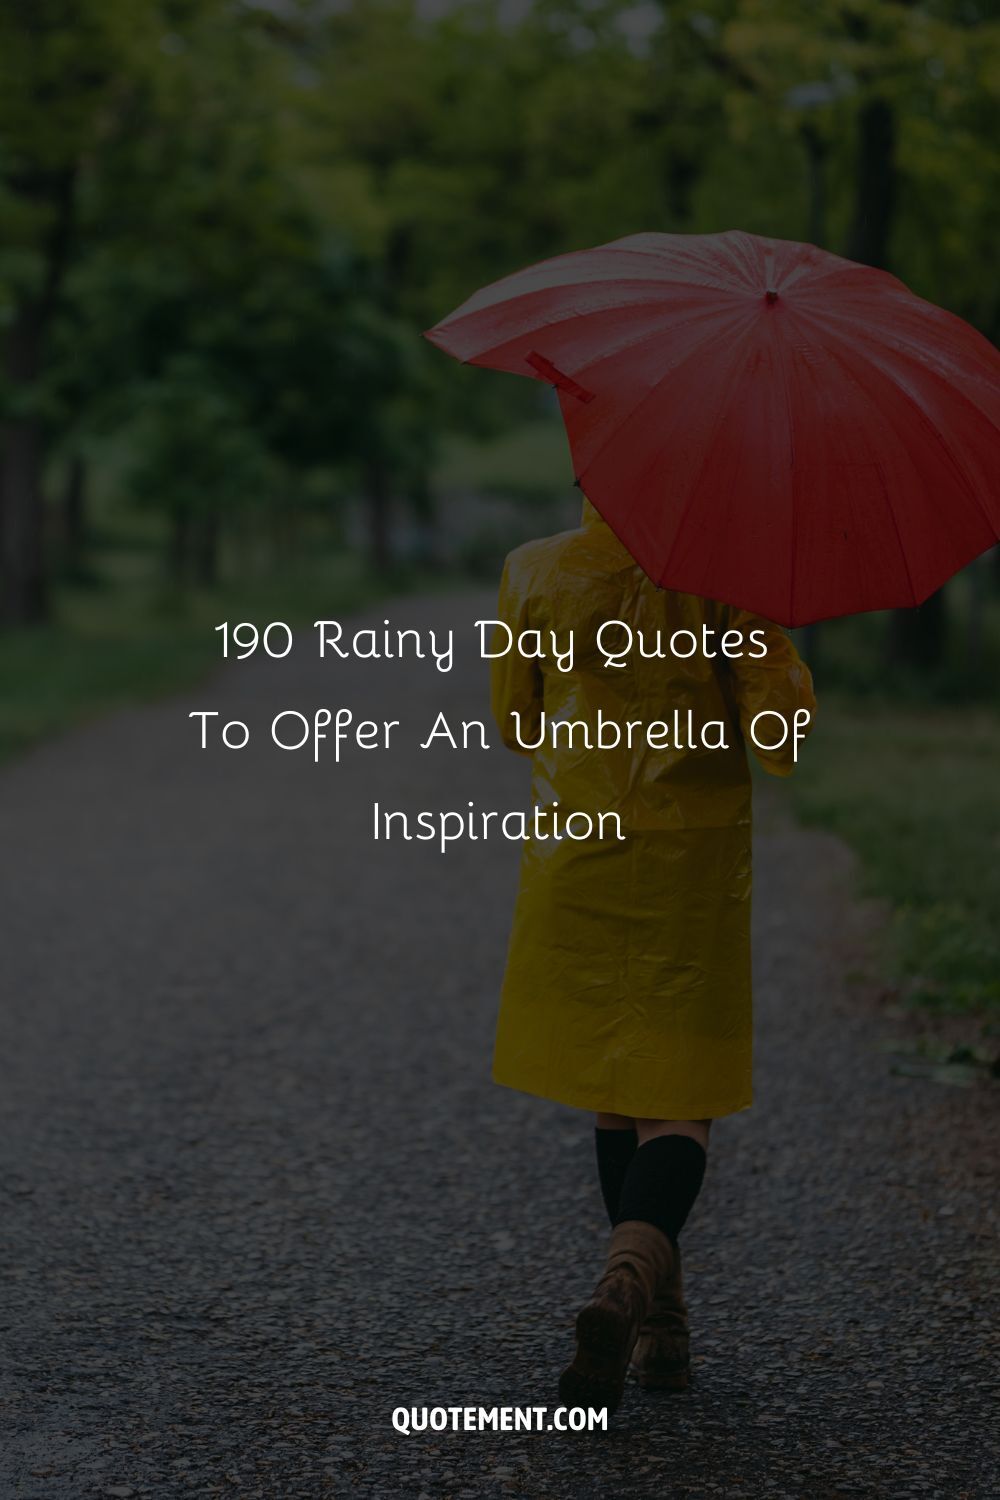 190 Rainy Day Quotes To Offer An Umbrella Of Inspiration 